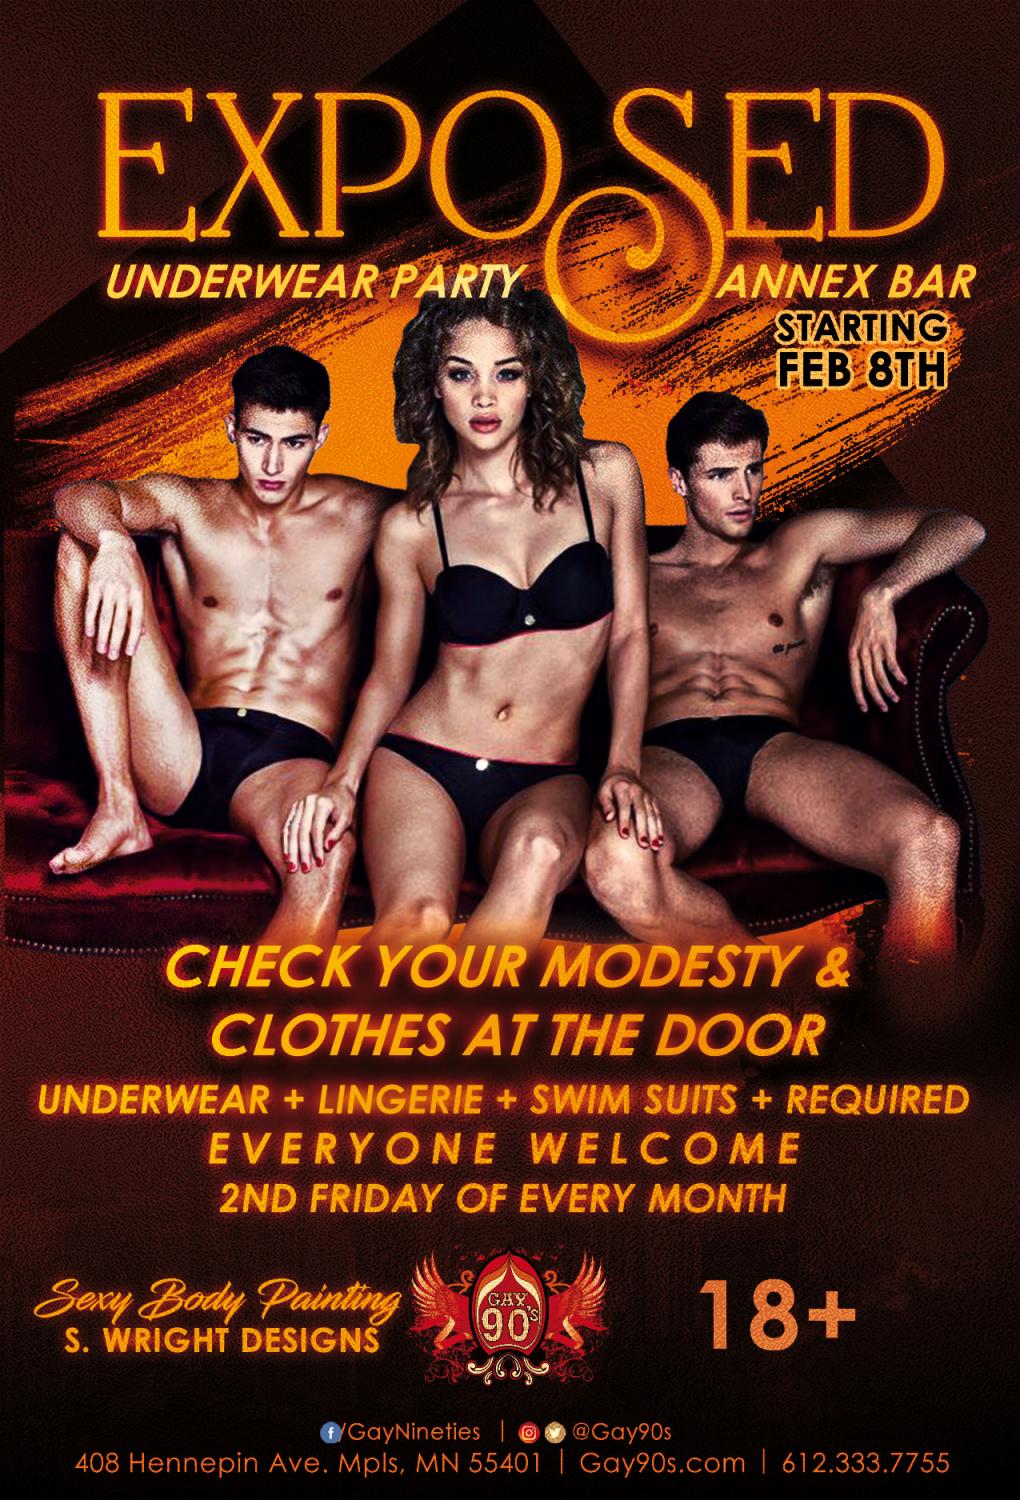 EXPOSED - Event Information - Wicked Gay Parties